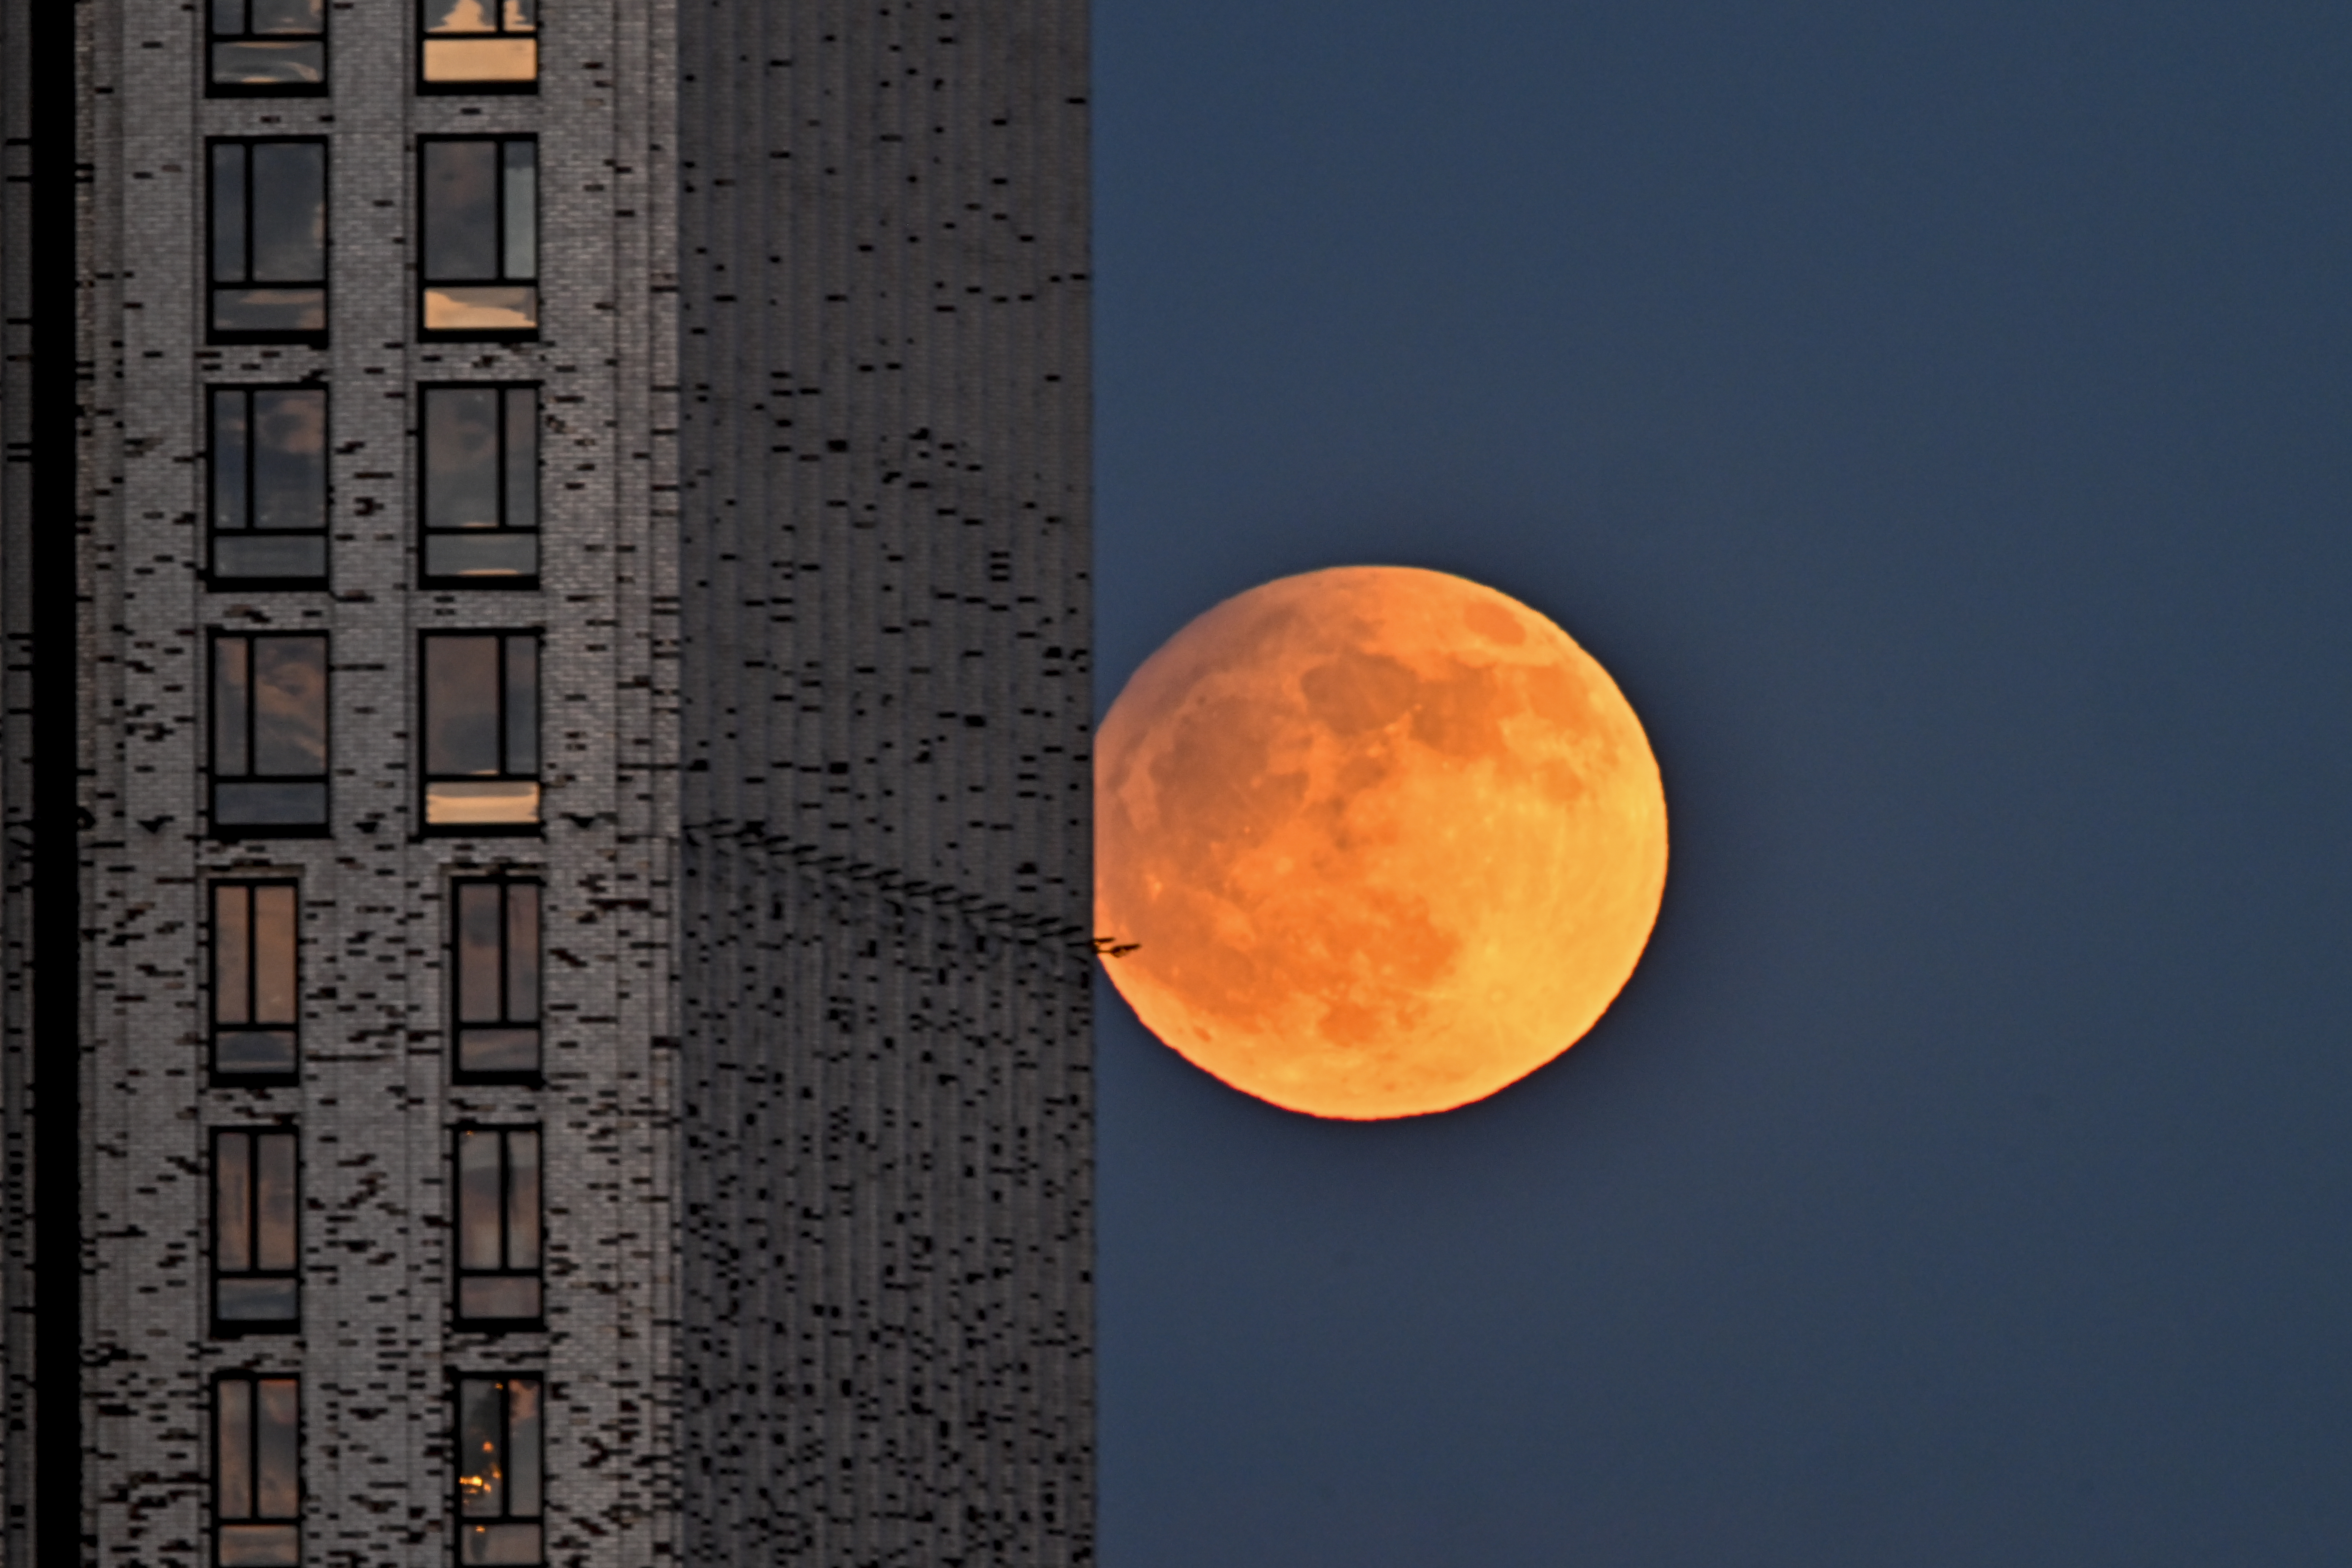 A shadow can be seen on the full moon in the sky when it sets behind buildings